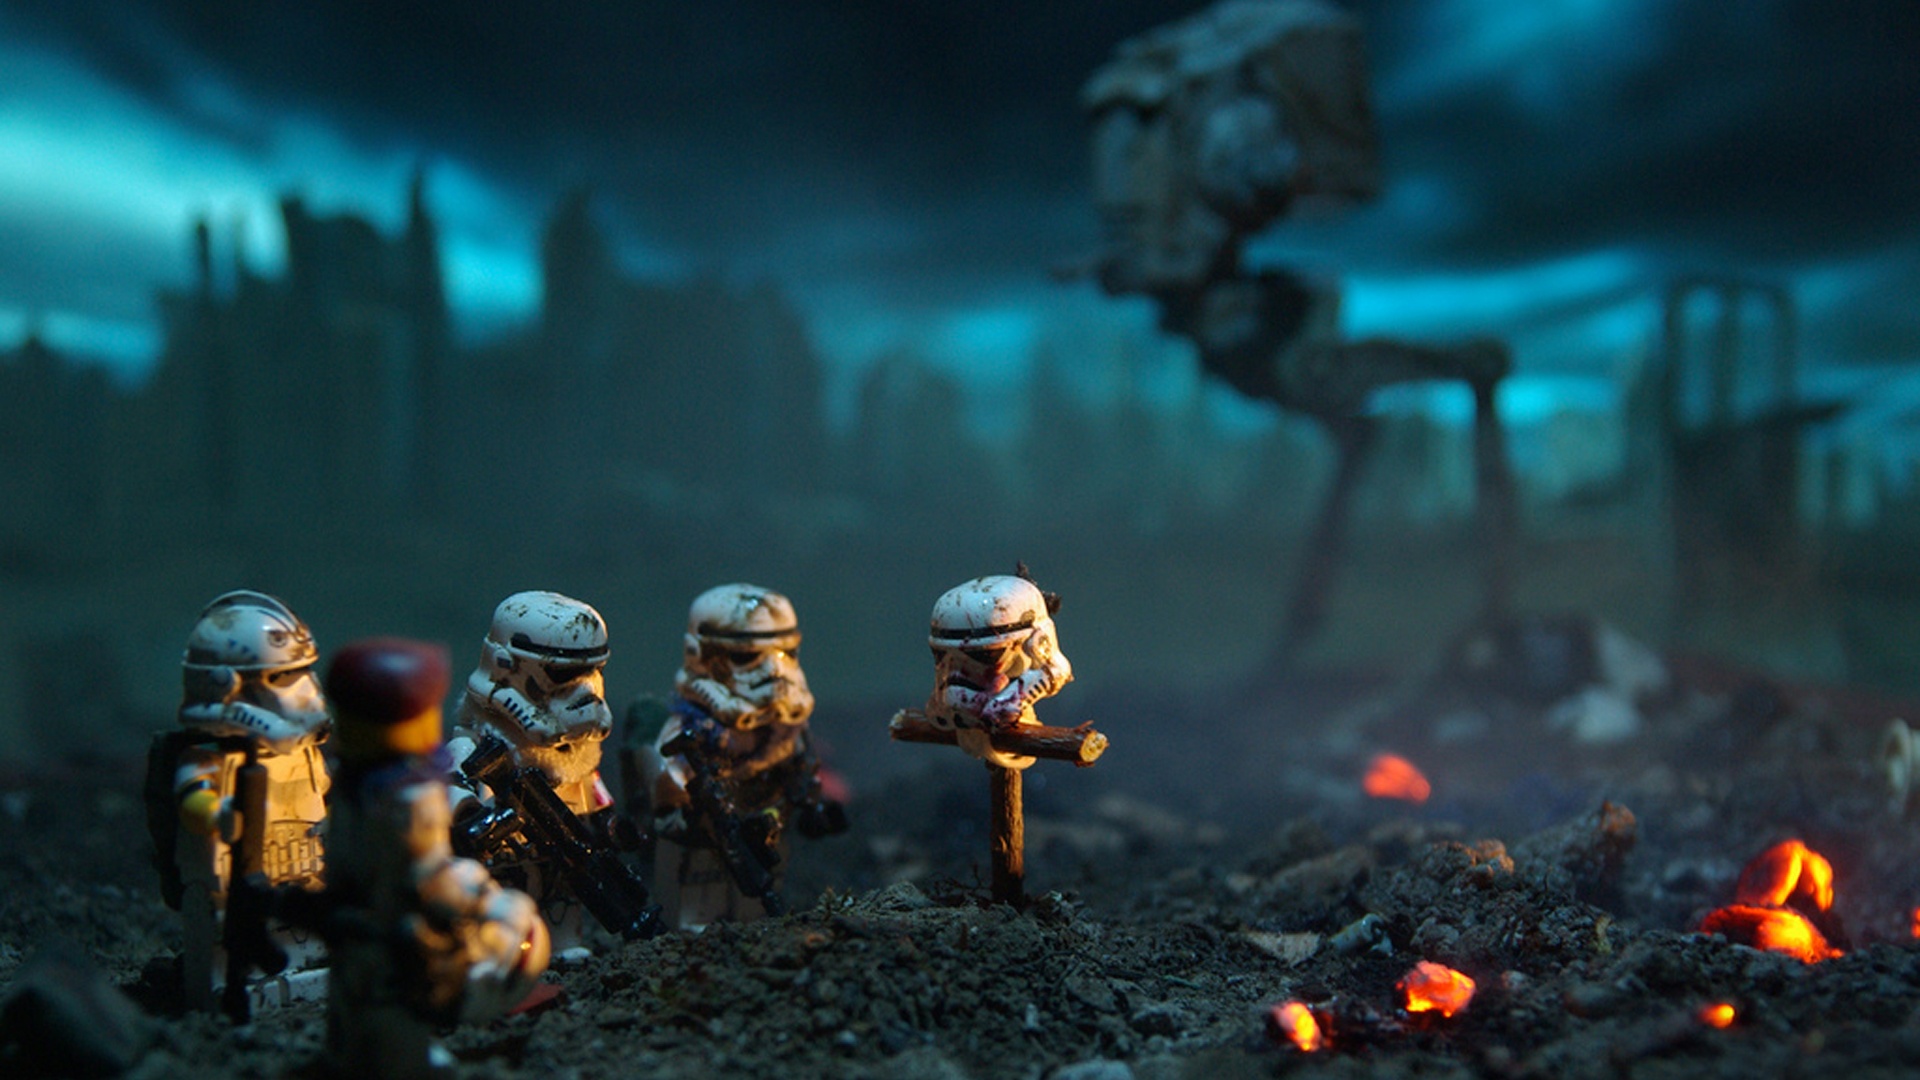 Lego Star Wars Stormtroopers Wallpapers HD Wallpapers 1920x1080